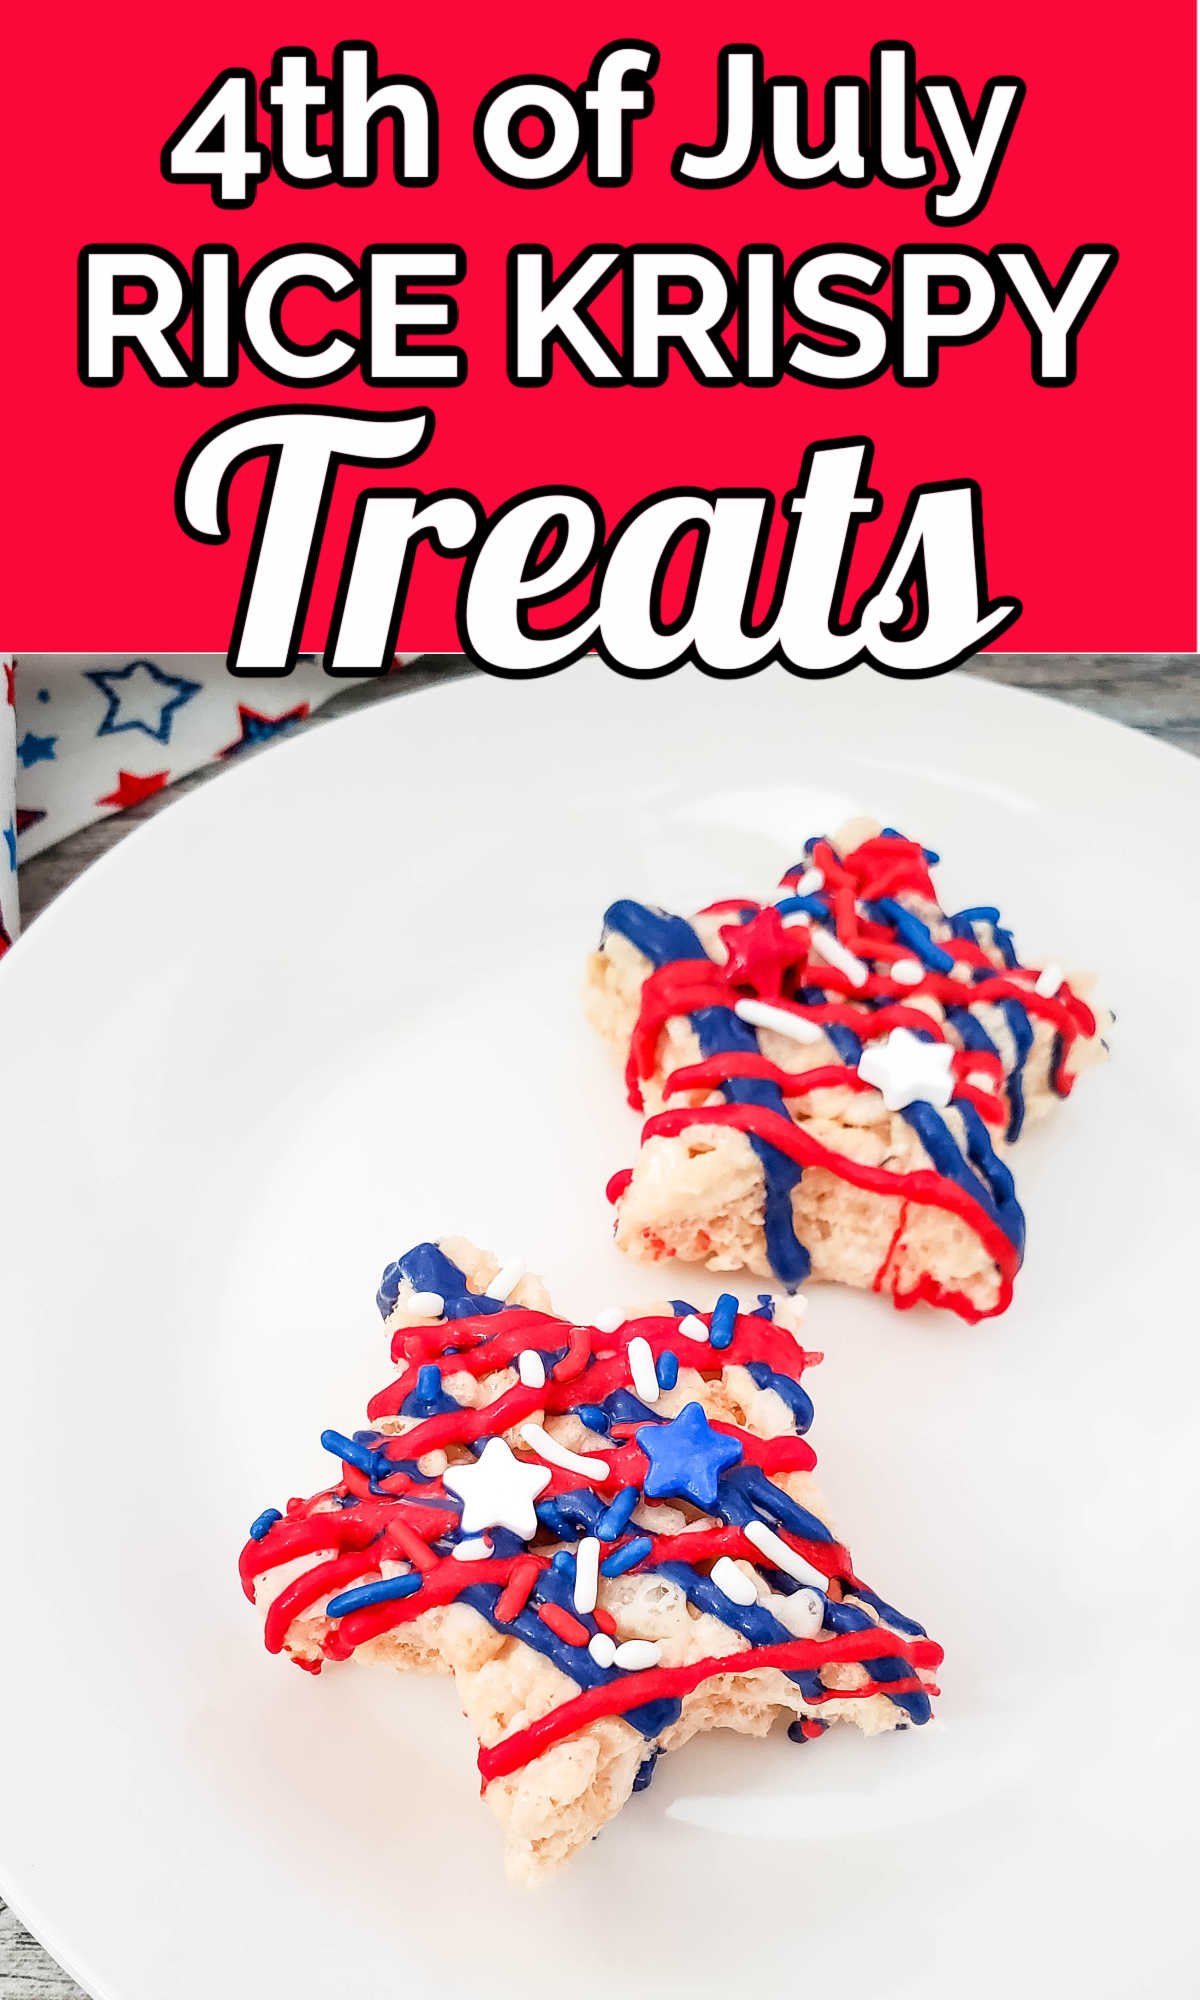 Top says "4th of July Rice Krispy Treats" and bottom is an image of 2 star Rice Krispy treats.